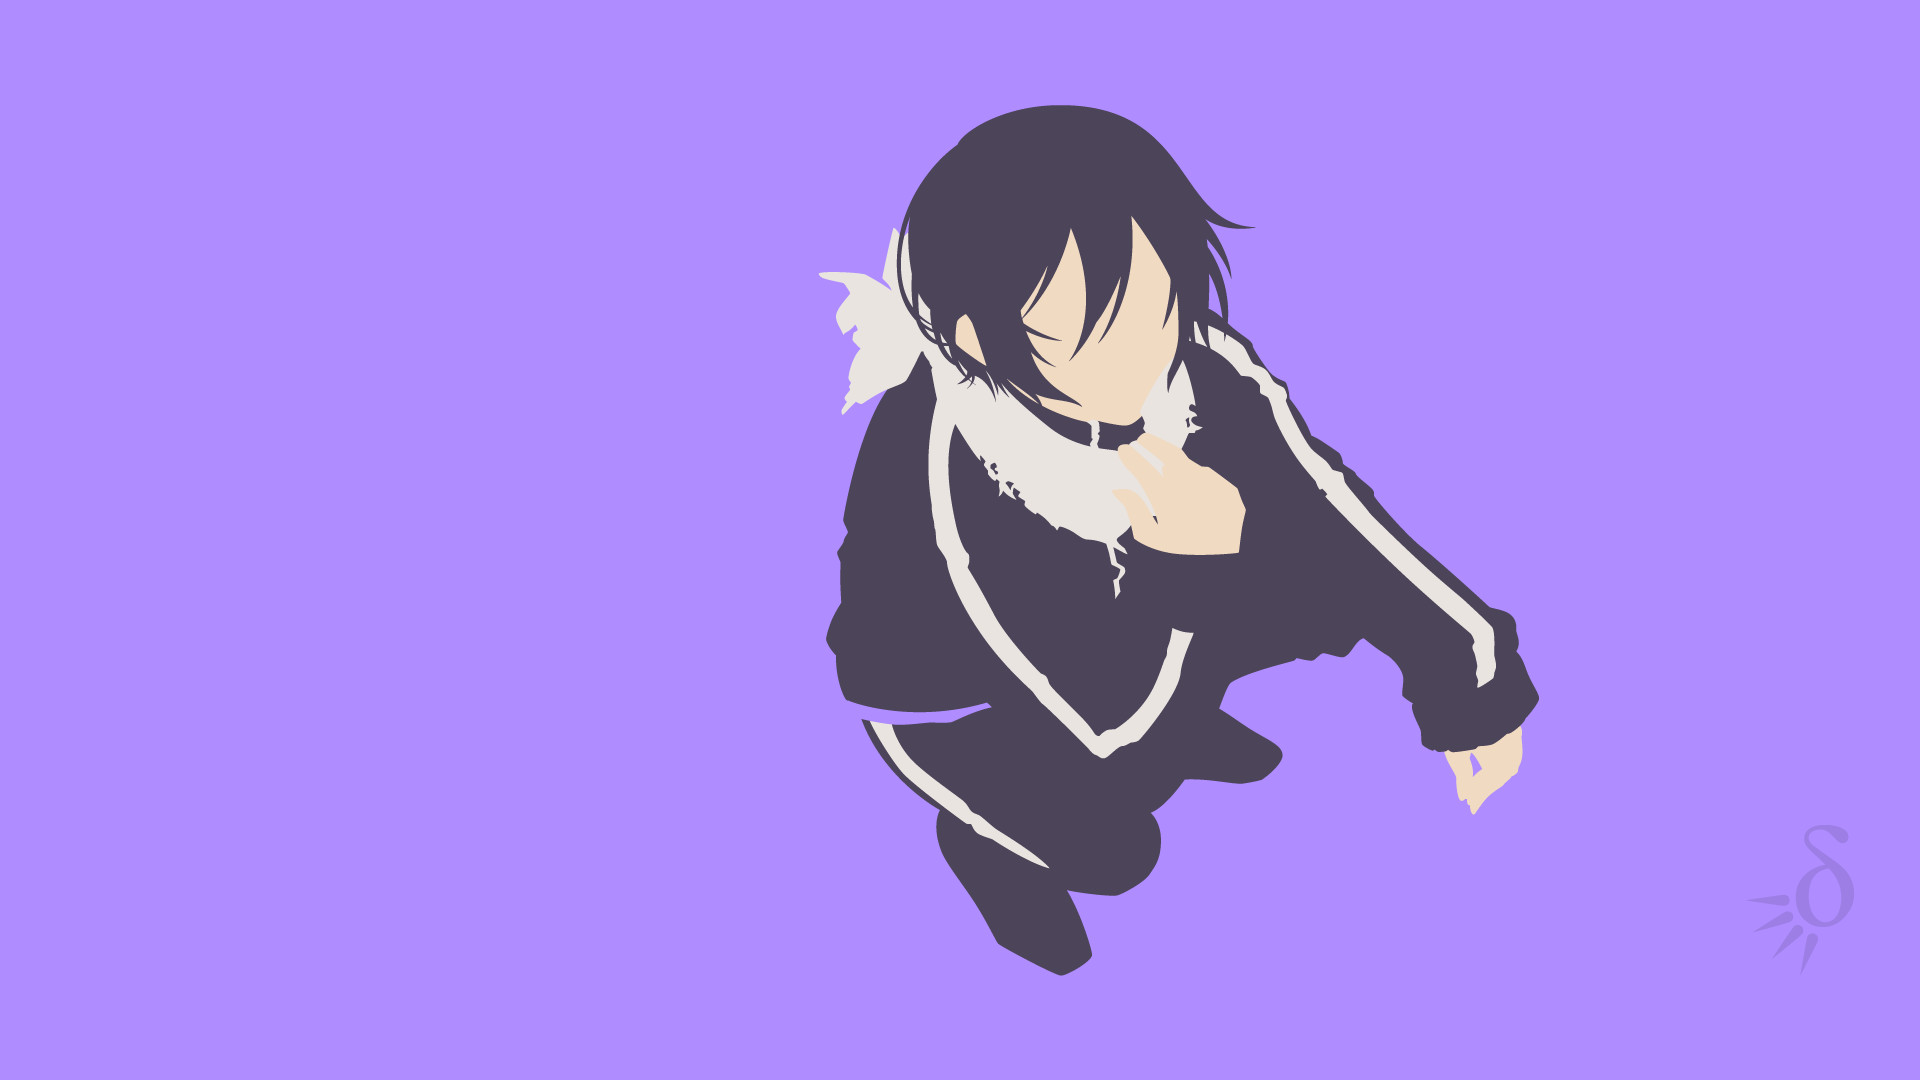 Noragami yato by krukmeister fan art wallpaper movies tv add a comment